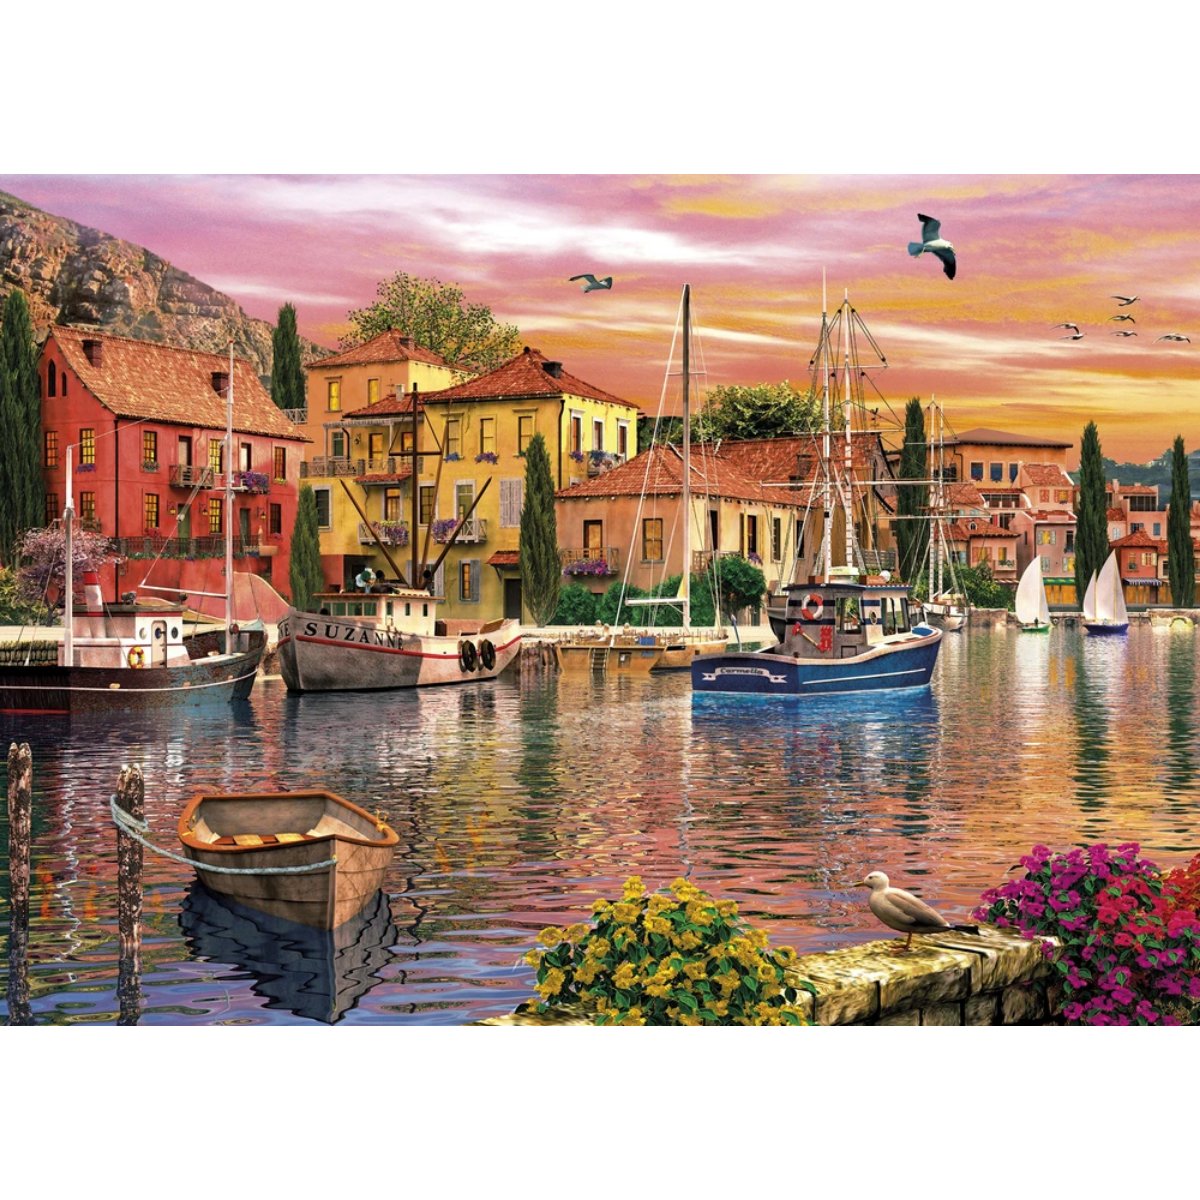 Gibsons Sails at Sunset Jigsaw Puzzle (2x 500 Pieces) - Phillips Hobbies